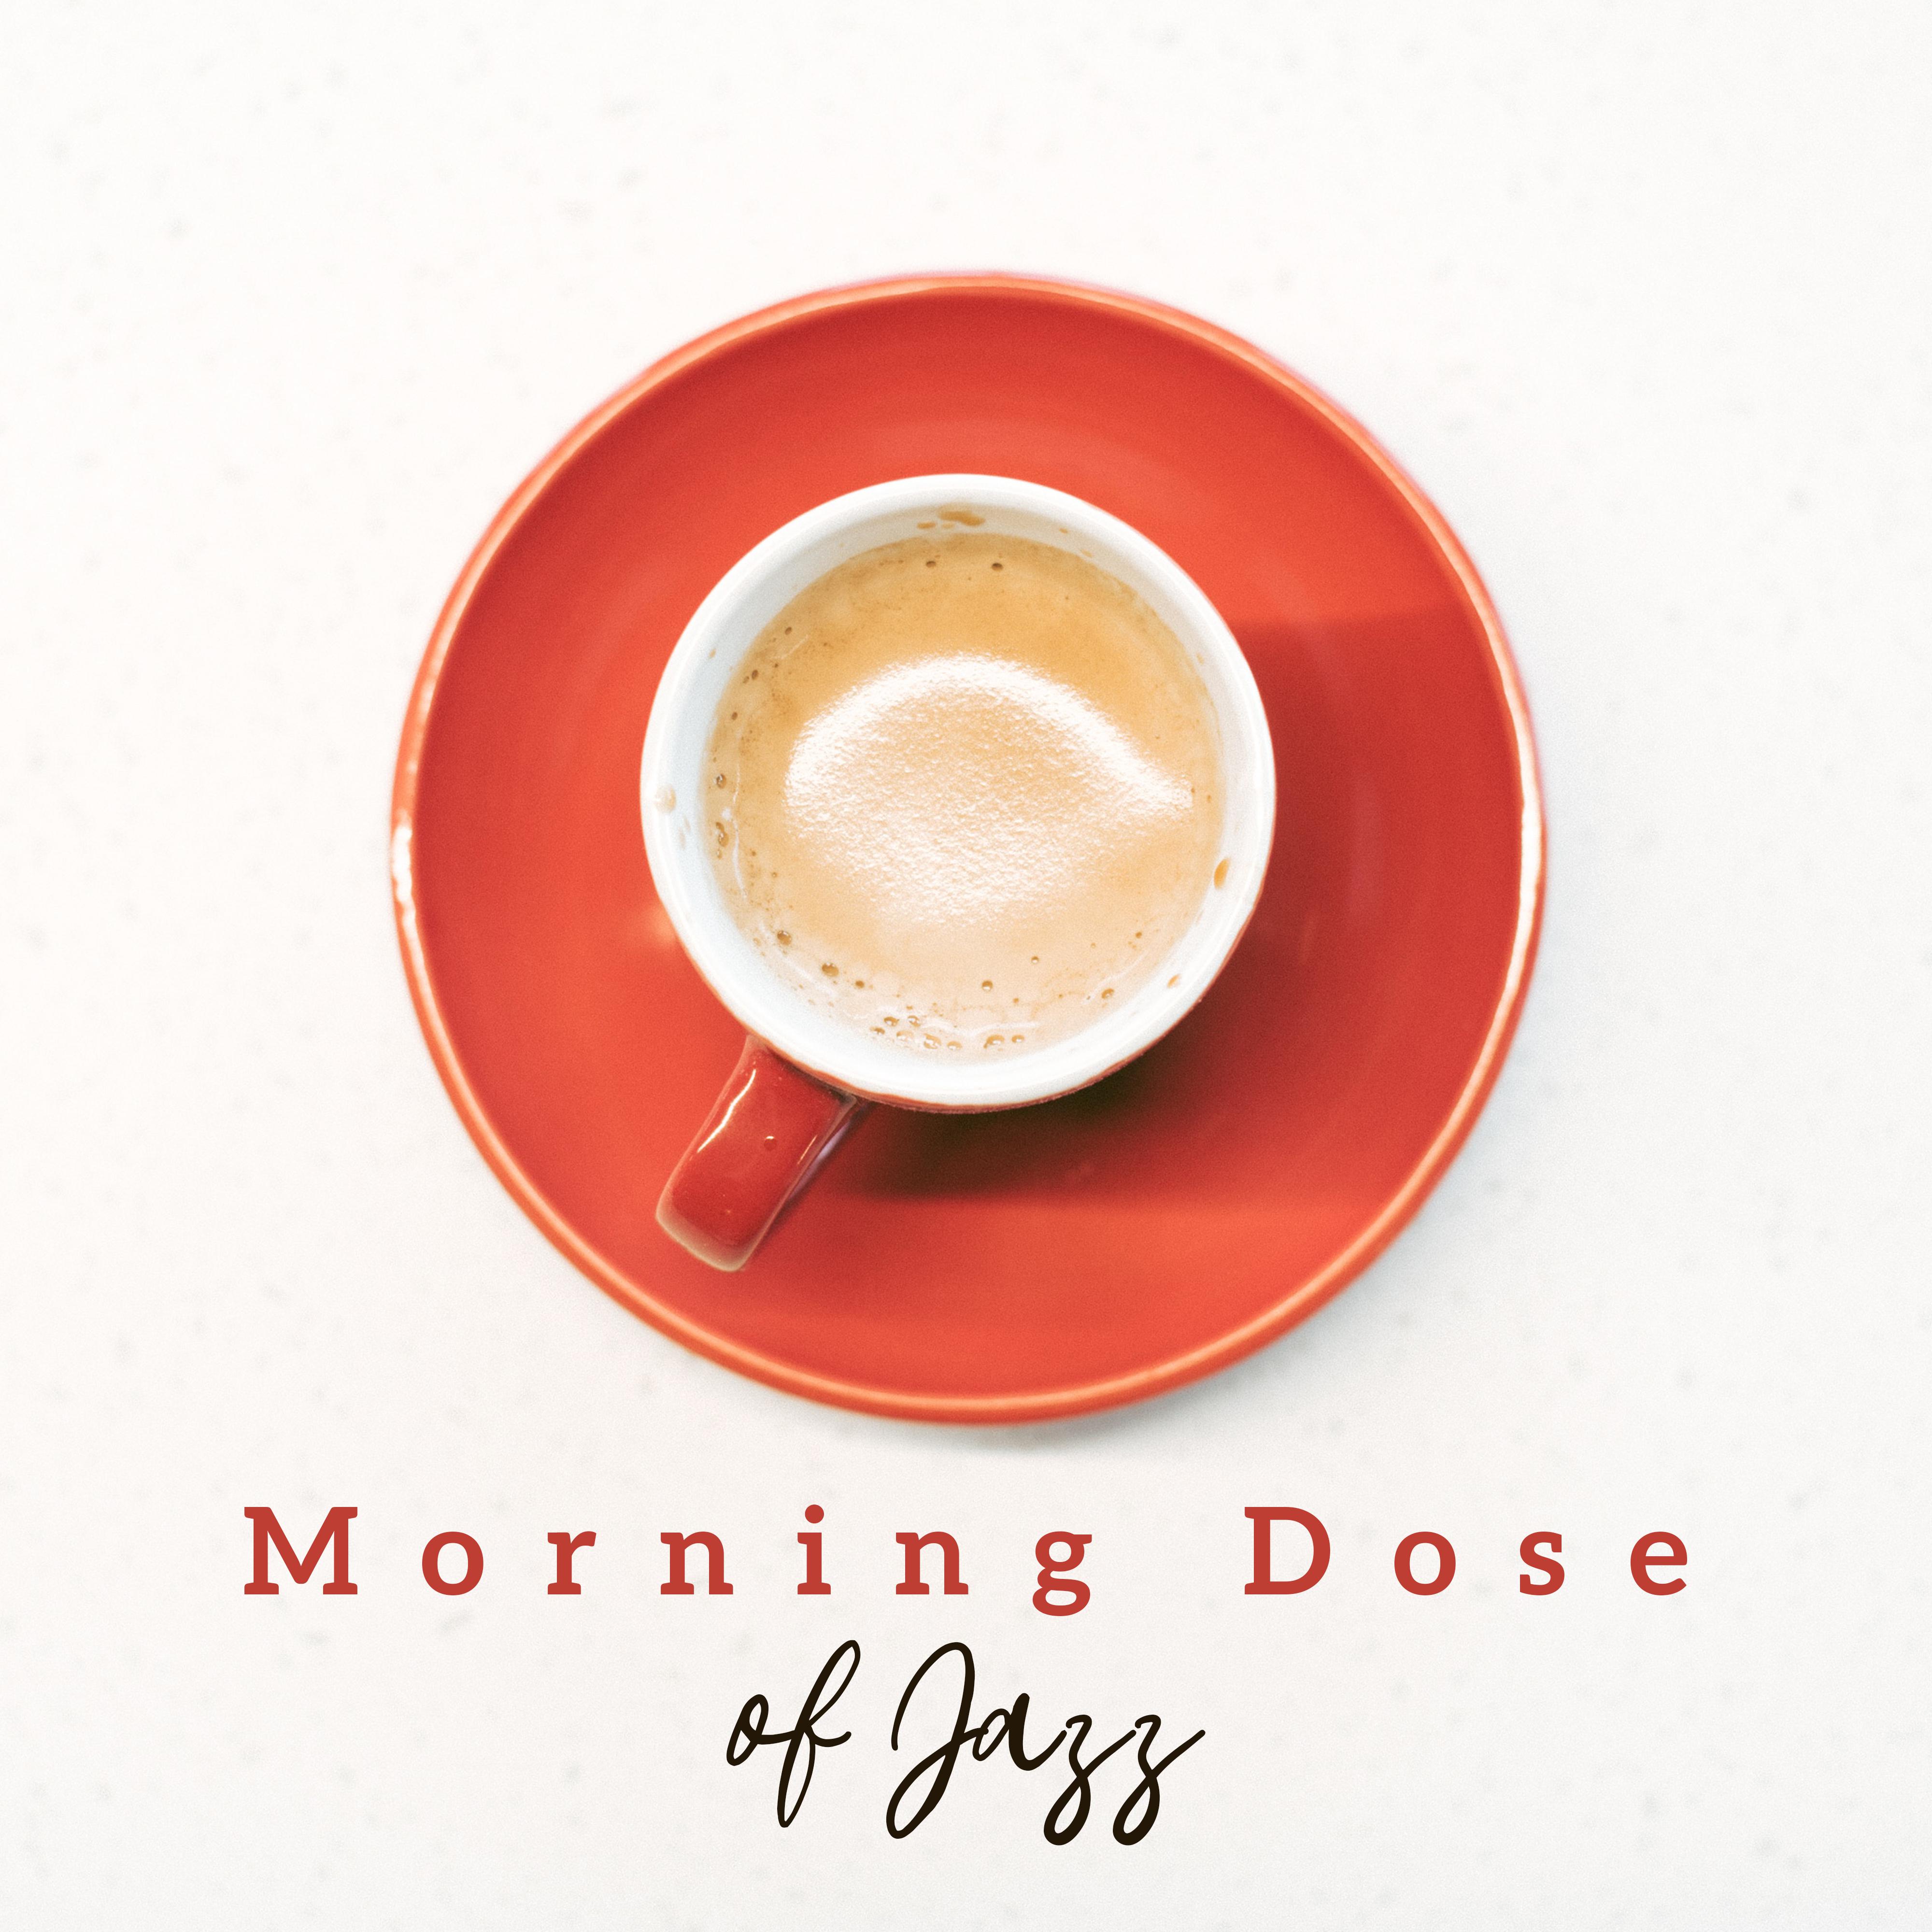 Morning Dose of Jazz - Smooth Jazz Coffee, Lounge Music, Soft Instrumental Jazz for Relaxation, Coffee Music, Peaceful Sounds